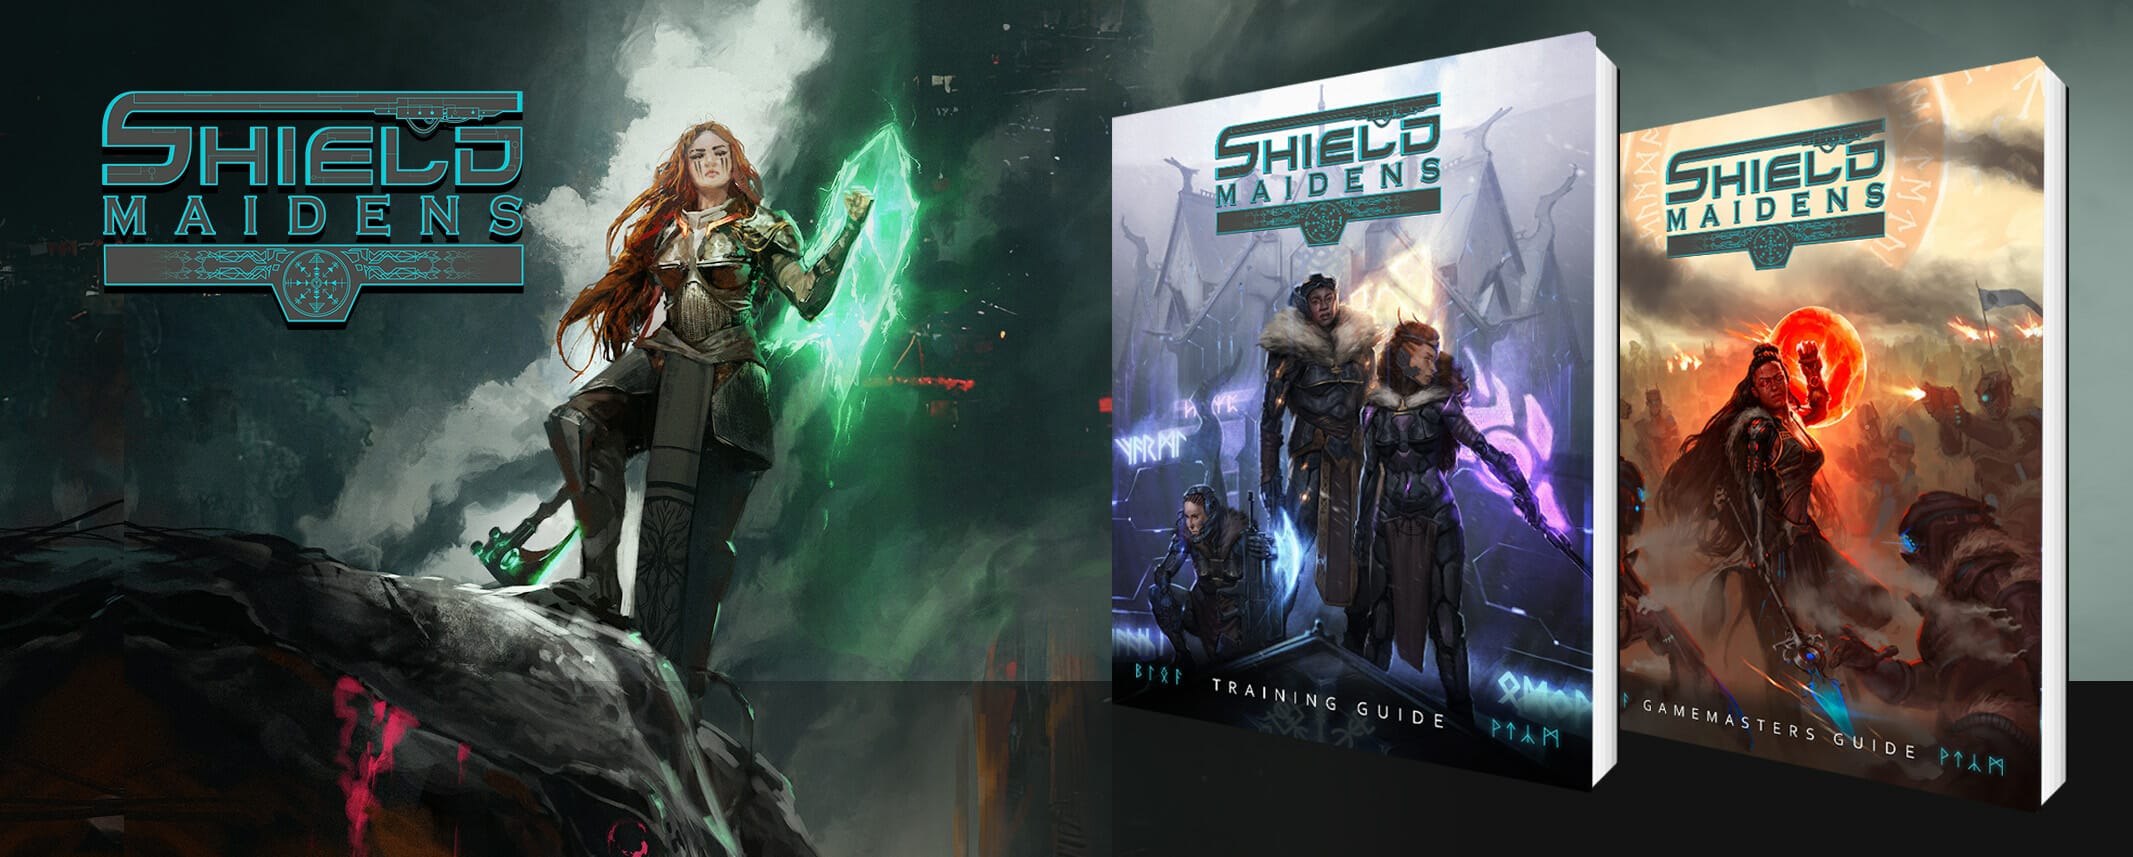 Shield Maidens hero image showing book covers